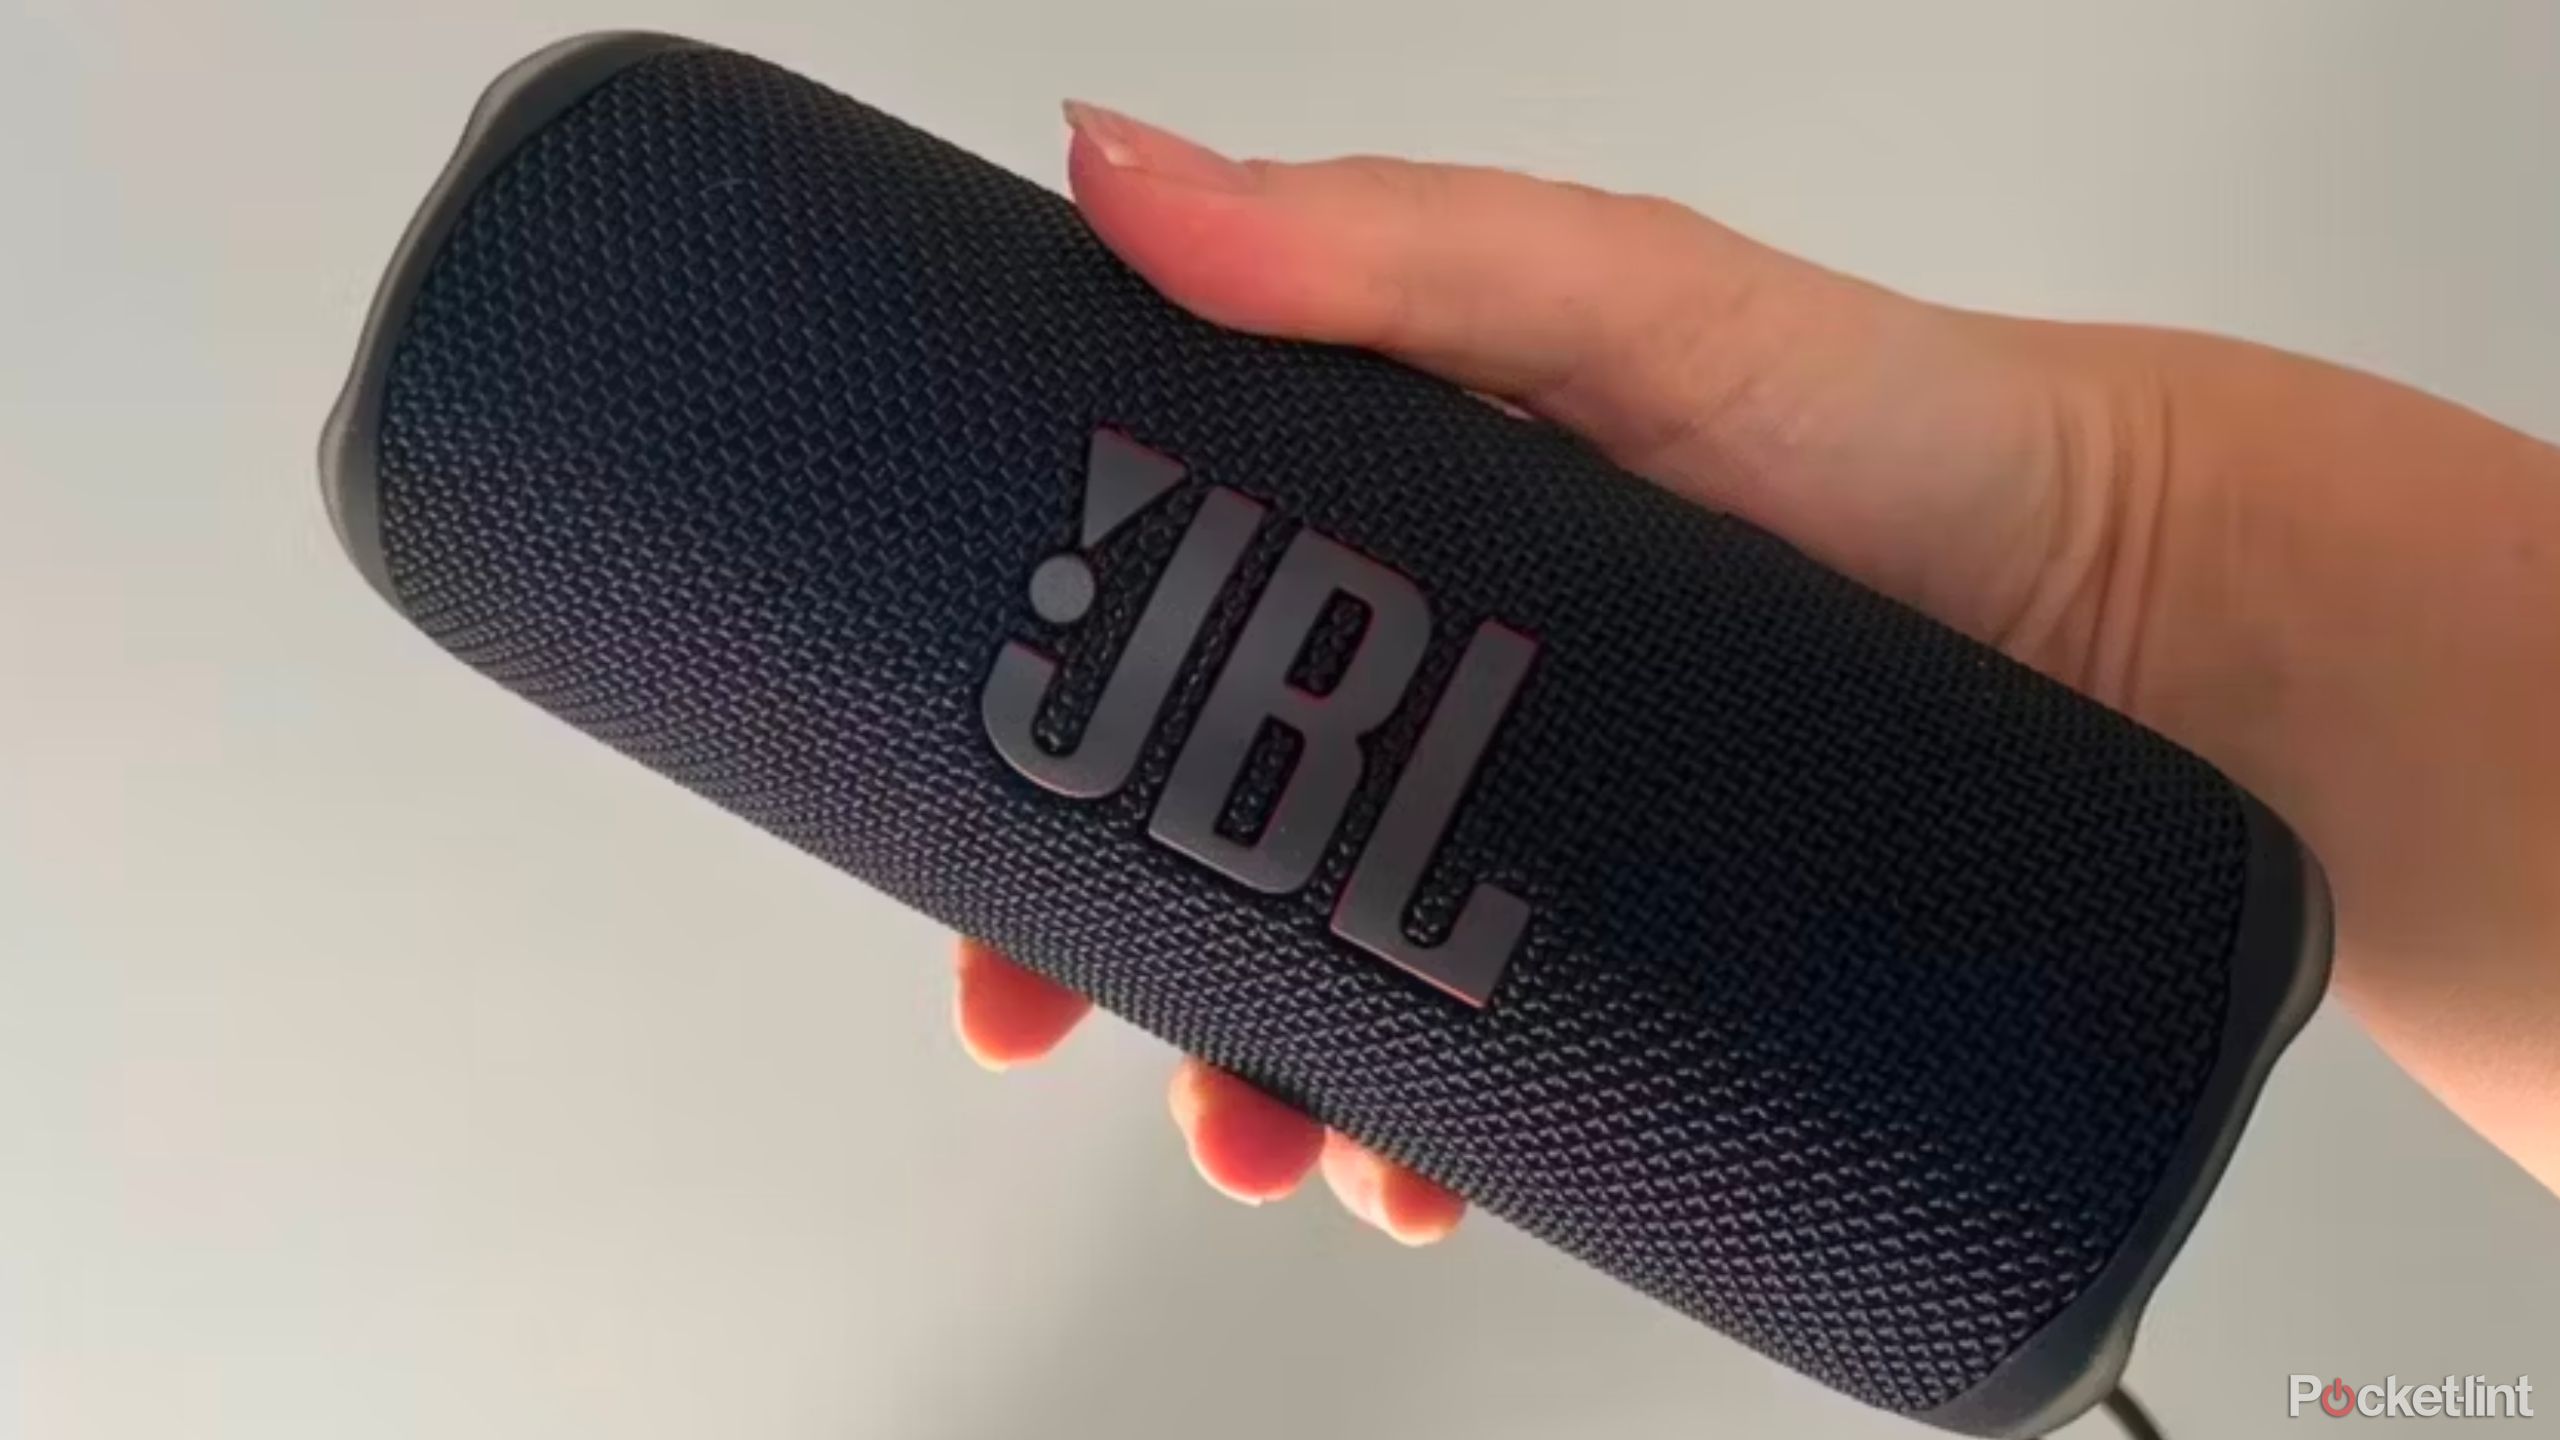 Got the JBL Go 2 And the JBL Clip 4 now i got 7 JBL's i got the JBL Go 2, JBL  Clip 4, JBL Flip 4, JBL Charge 4, JBL Extreme